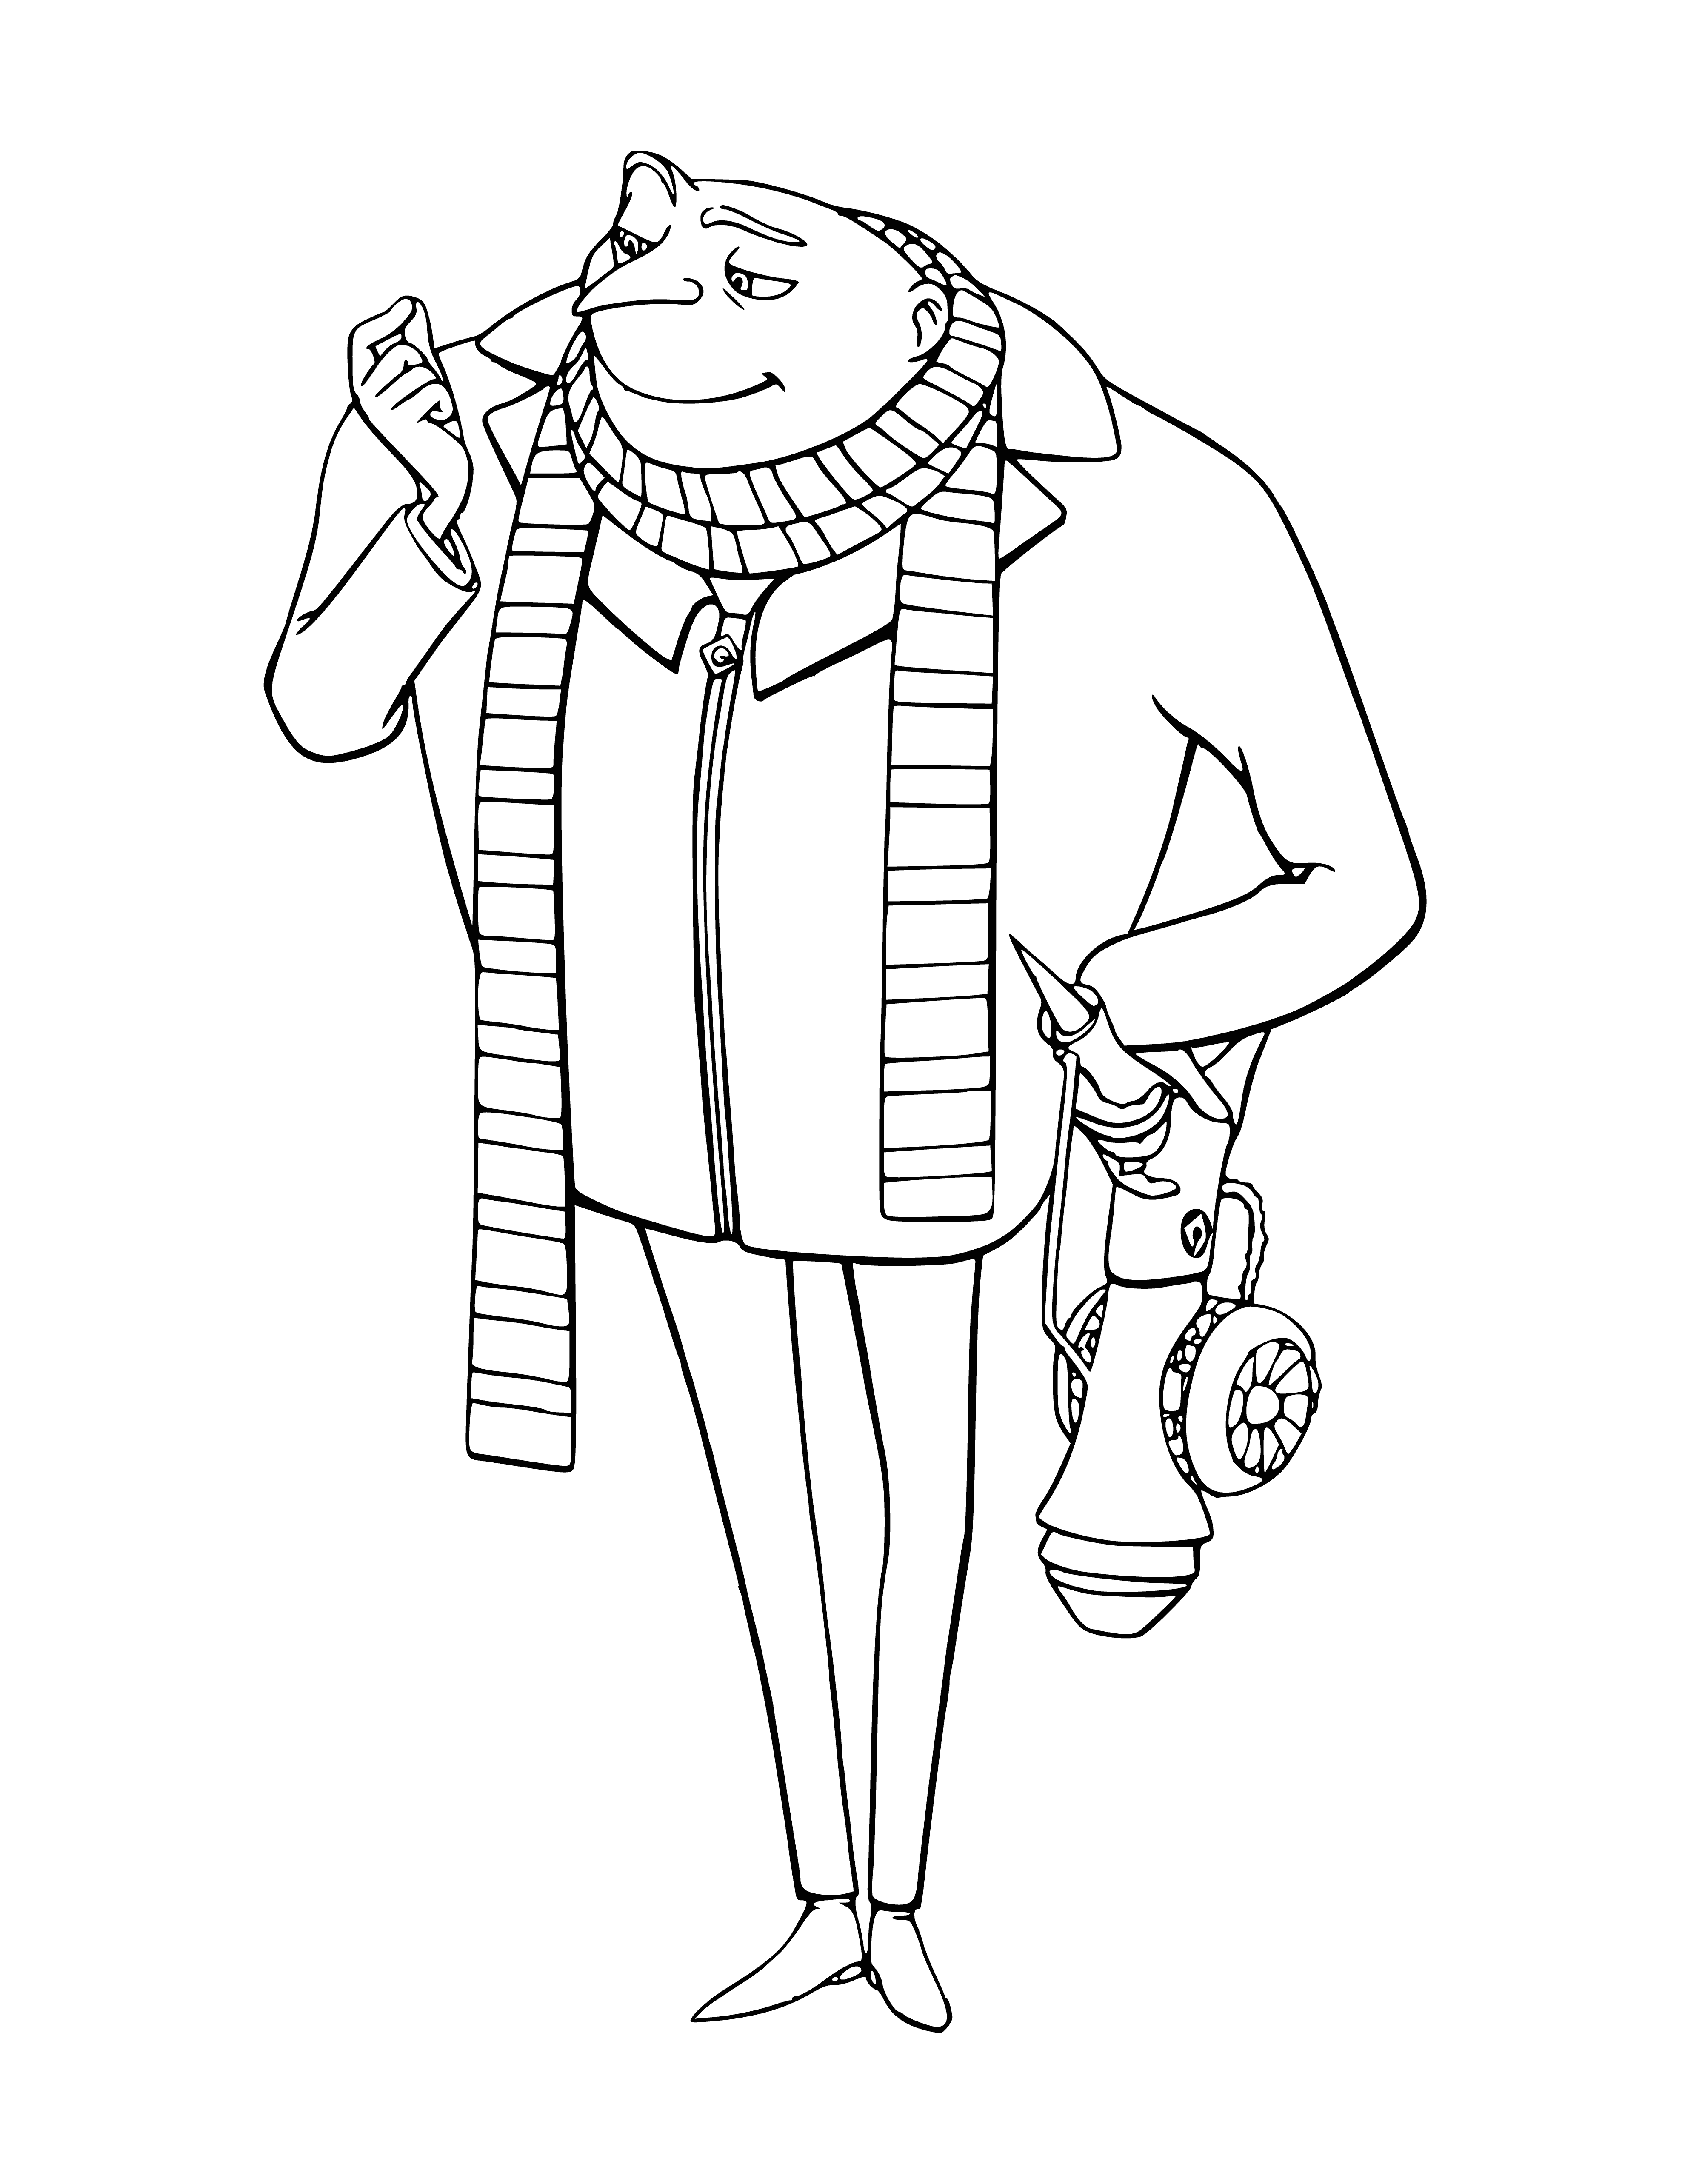 coloring page: Gru surprises even himself when a small girl hands him a flower, putting a smile on his face.